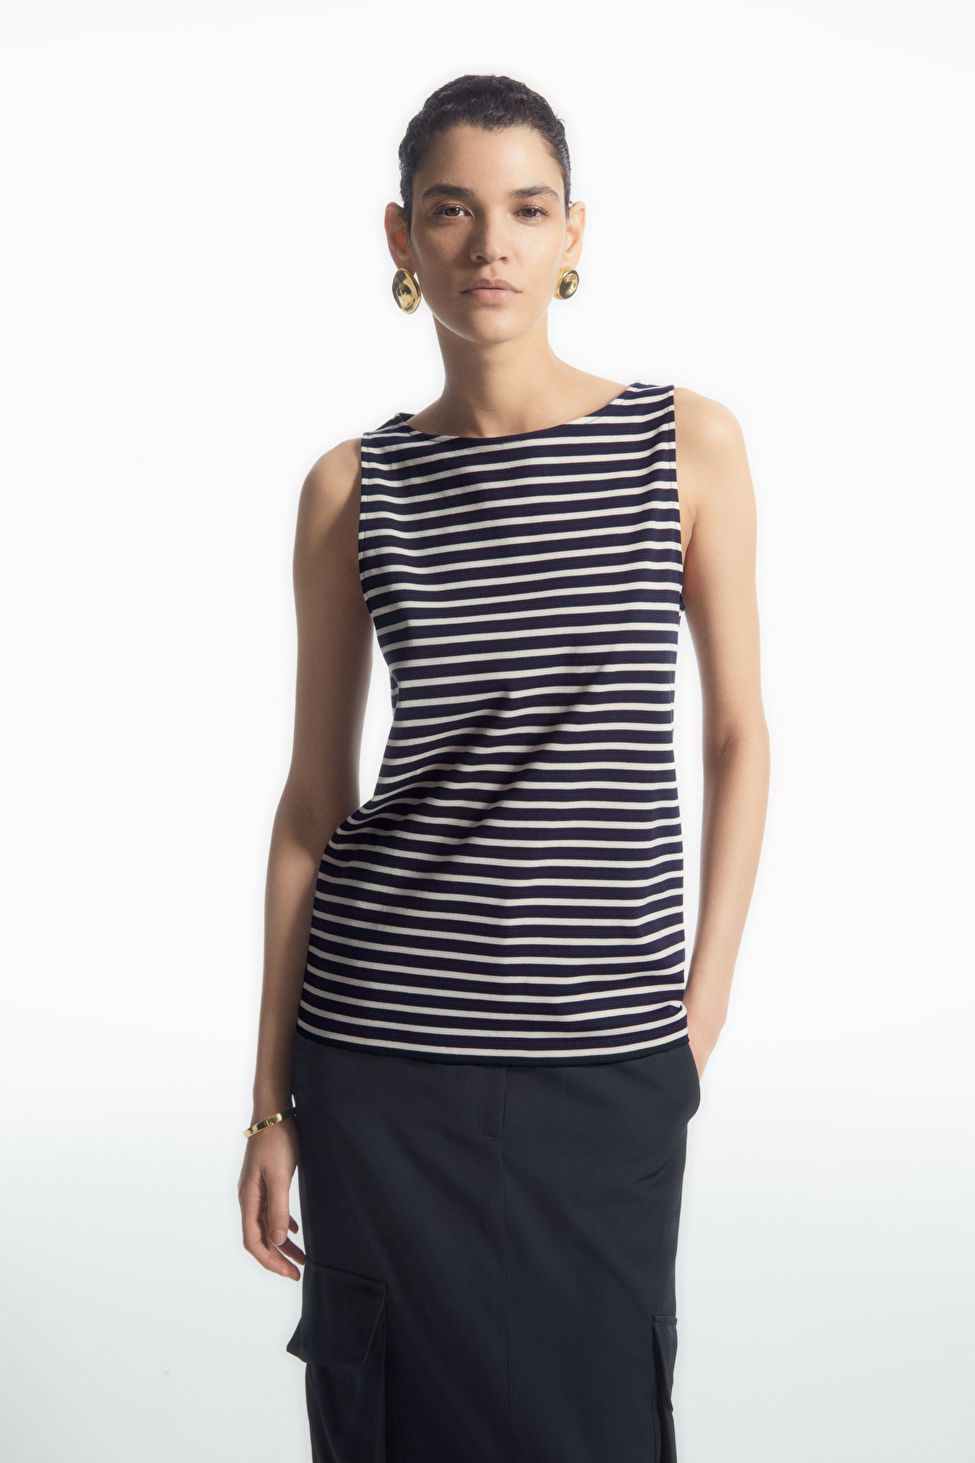 BOAT-NECK TANK TOP - NAVY / STRIPED - COS | COS UK